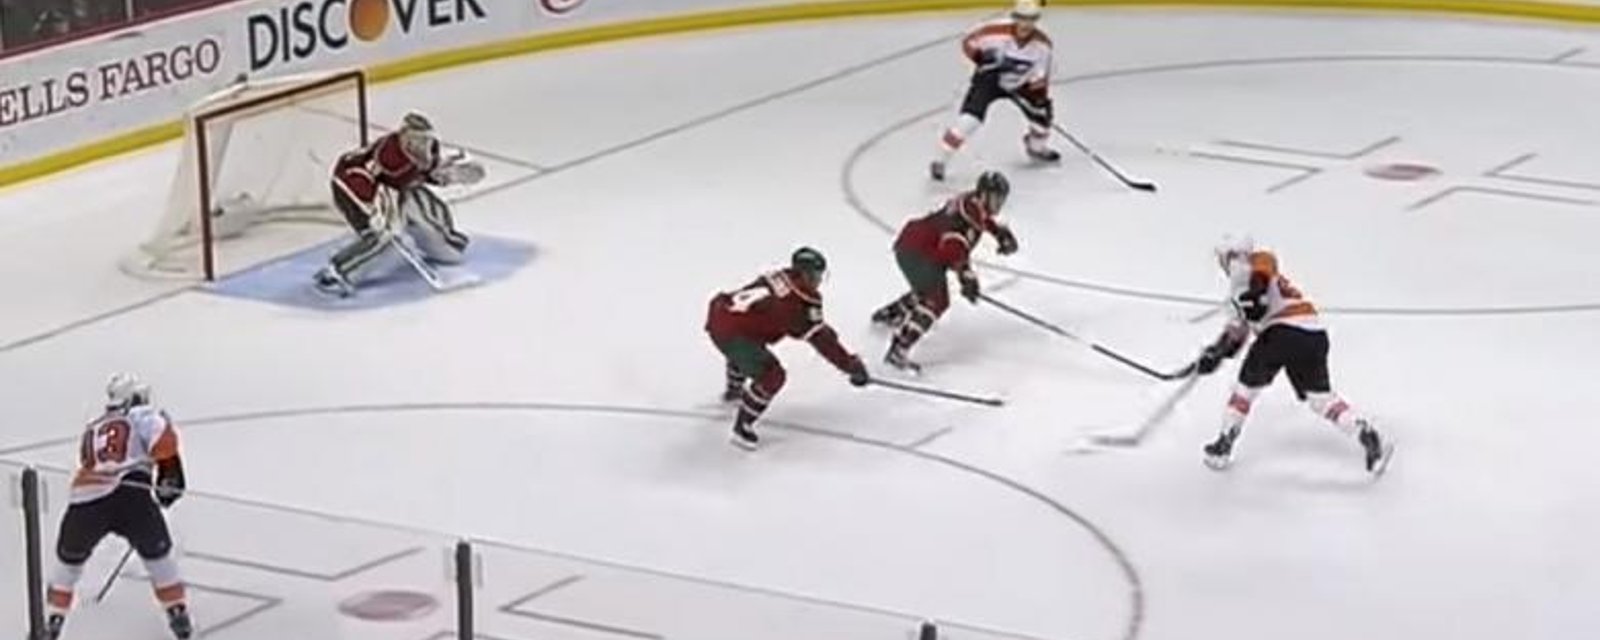 Flyers win it in OT with this beautiful Tic-Tac-Toe play.